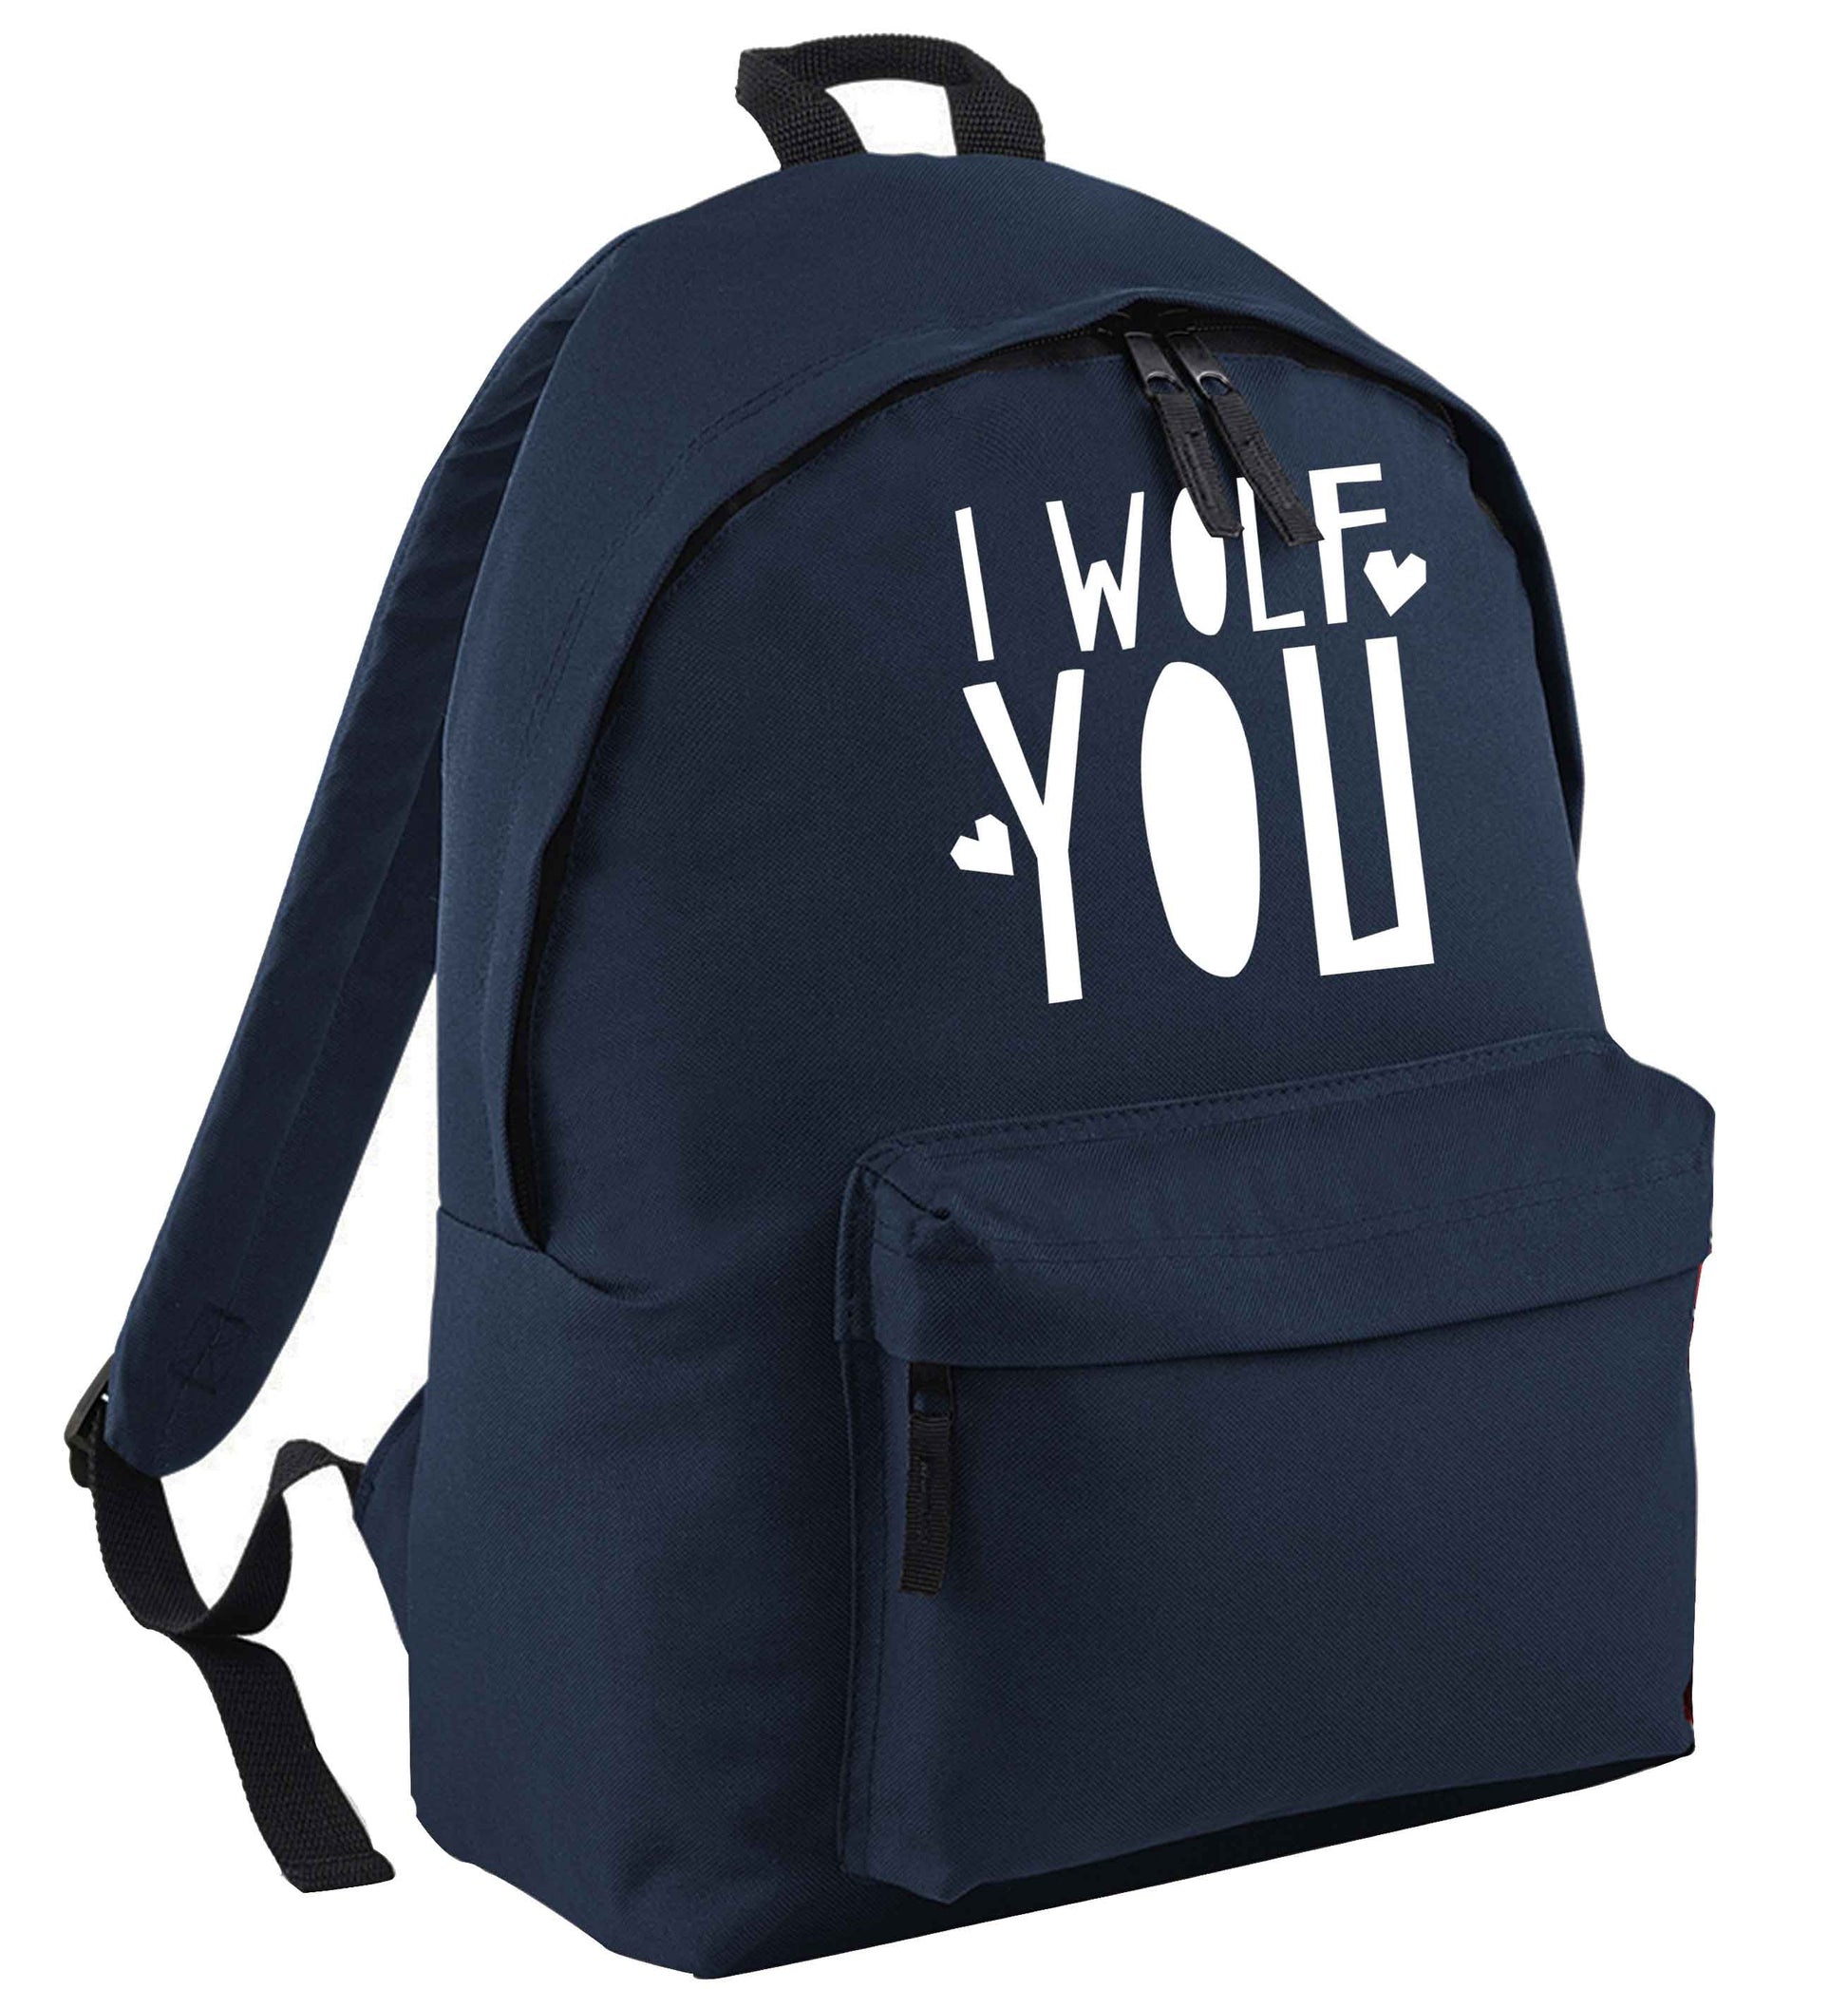 I wolf you navy adults backpack